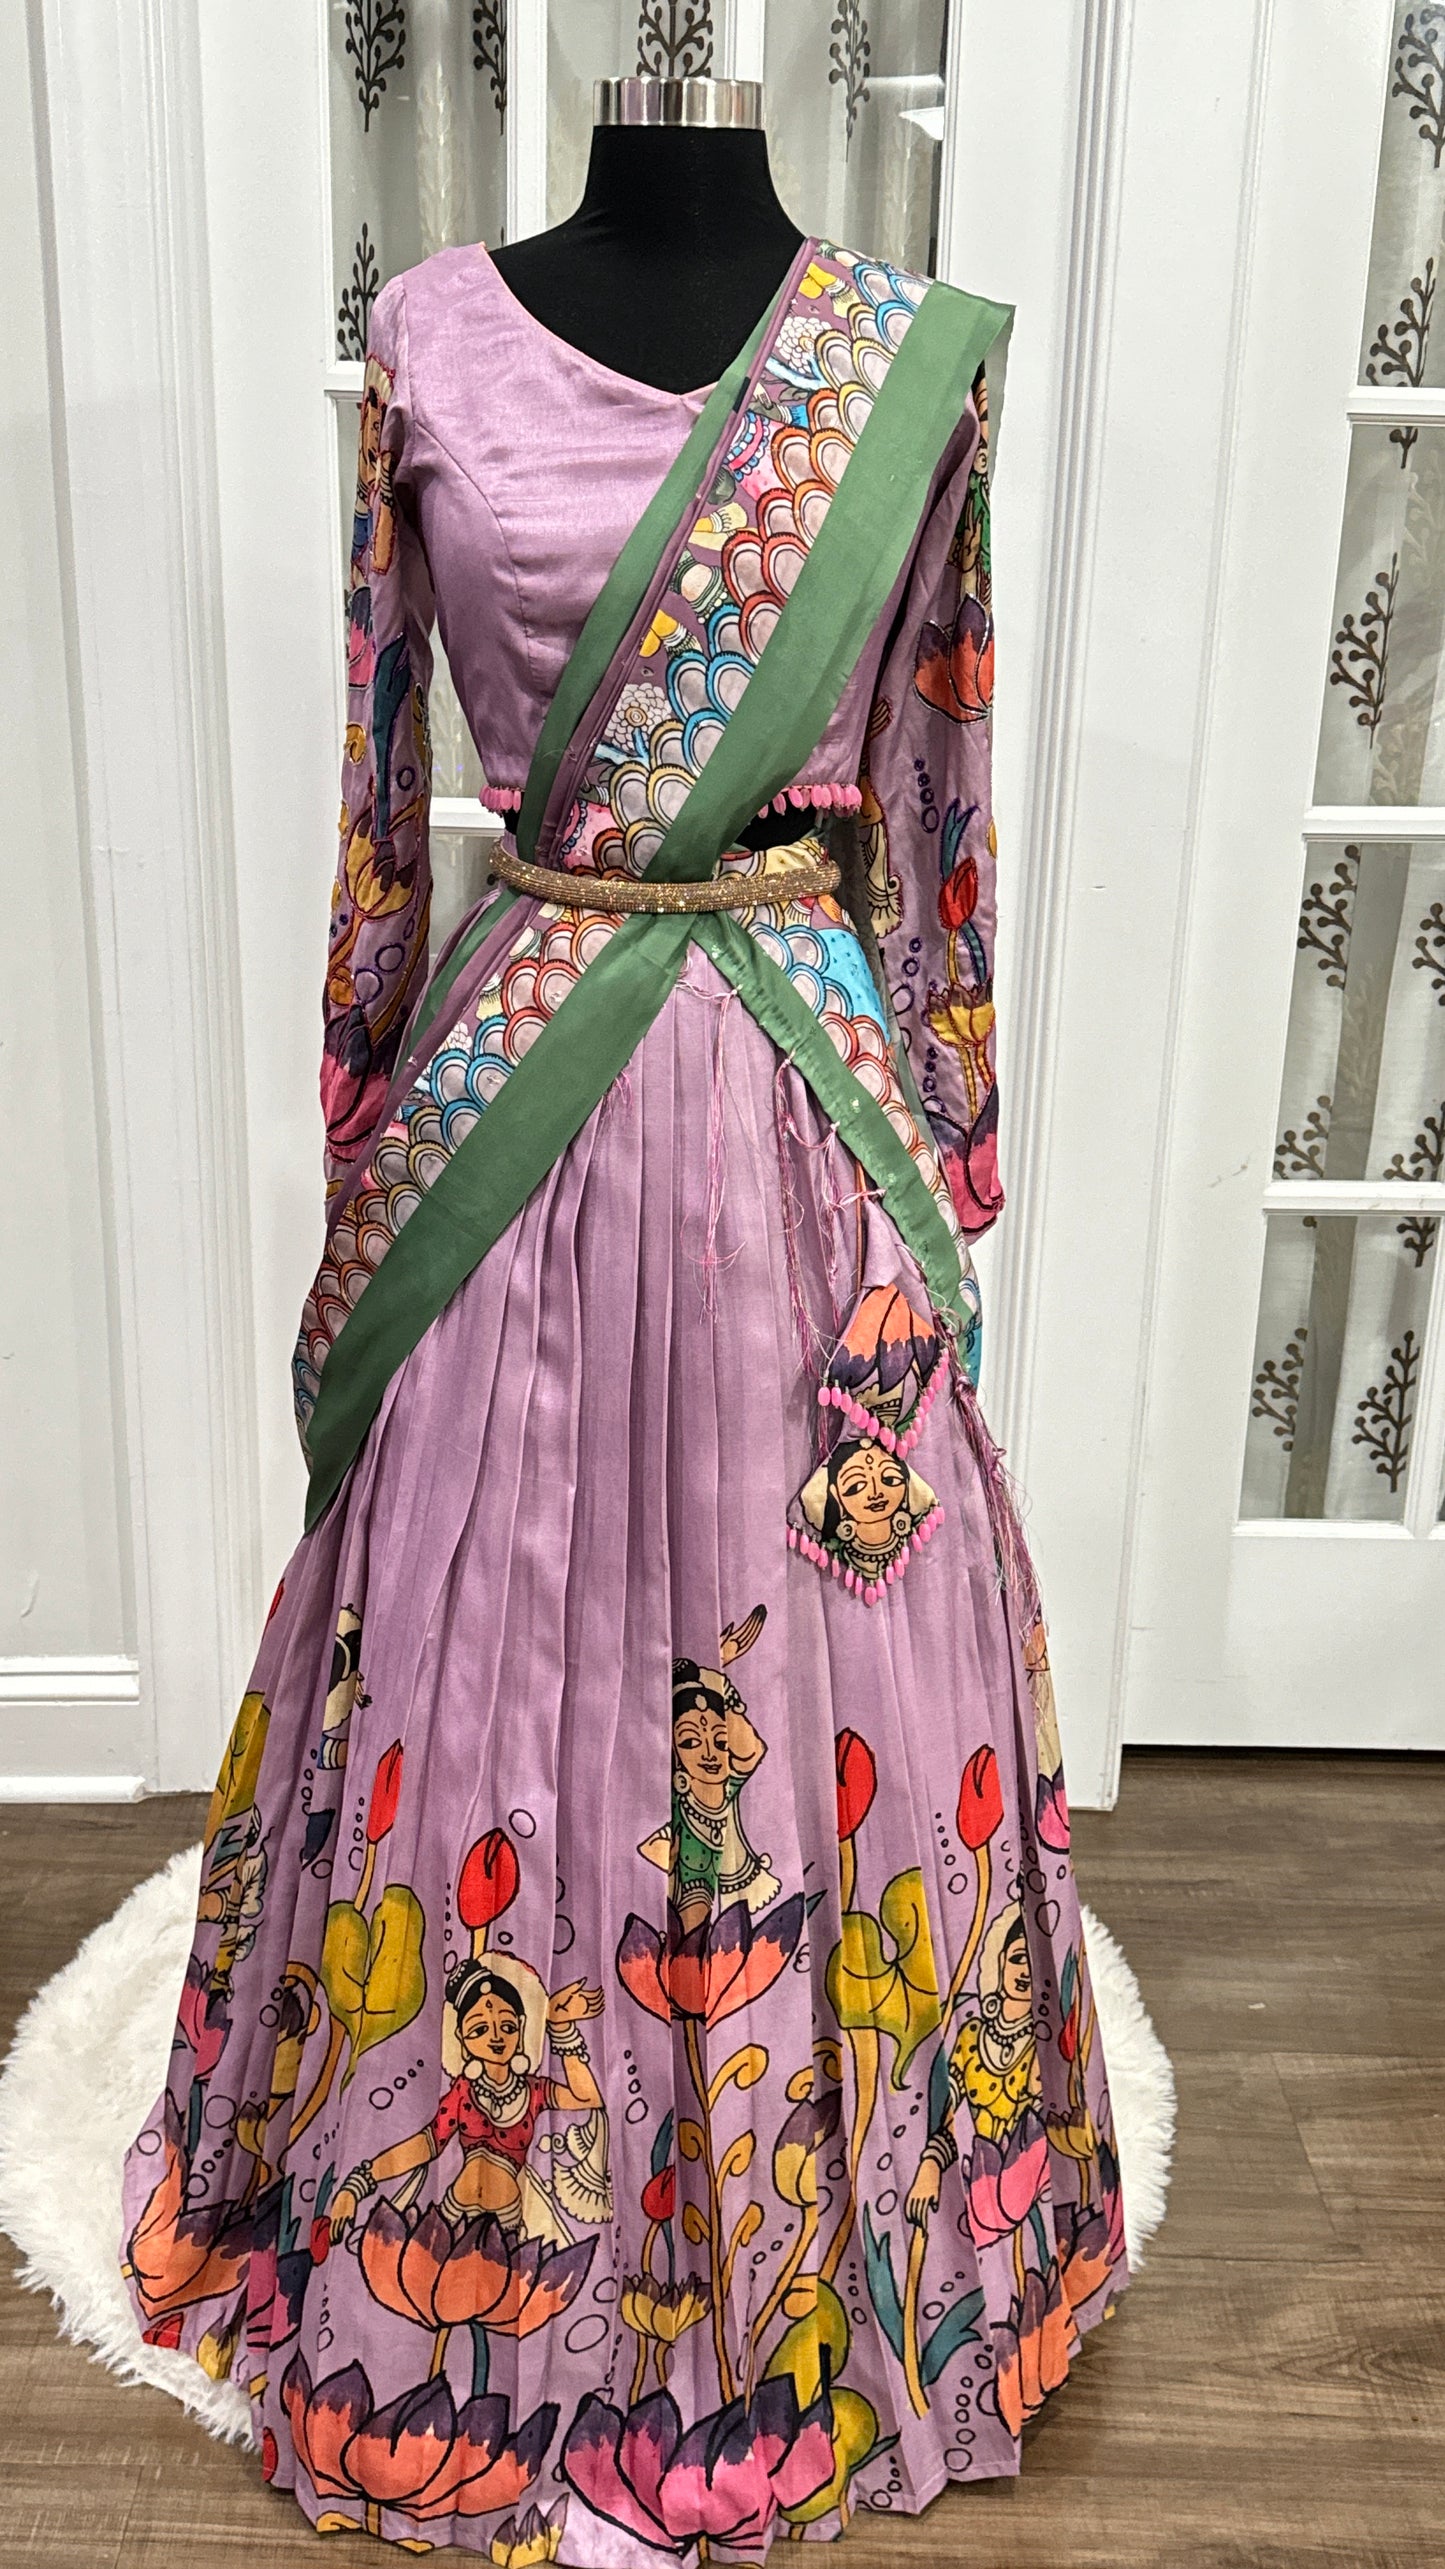 Gorgeous Kalamkari Half saree with Maggam work designer full Sleeves blouse in Lavender color. 🥰❤️
Blouse 36/38 plus margin  can expand upto 40. 
Lehanga length: 41 in

fabric: Crepe silk very soft in touch 
Dupatta: Chinnon silk